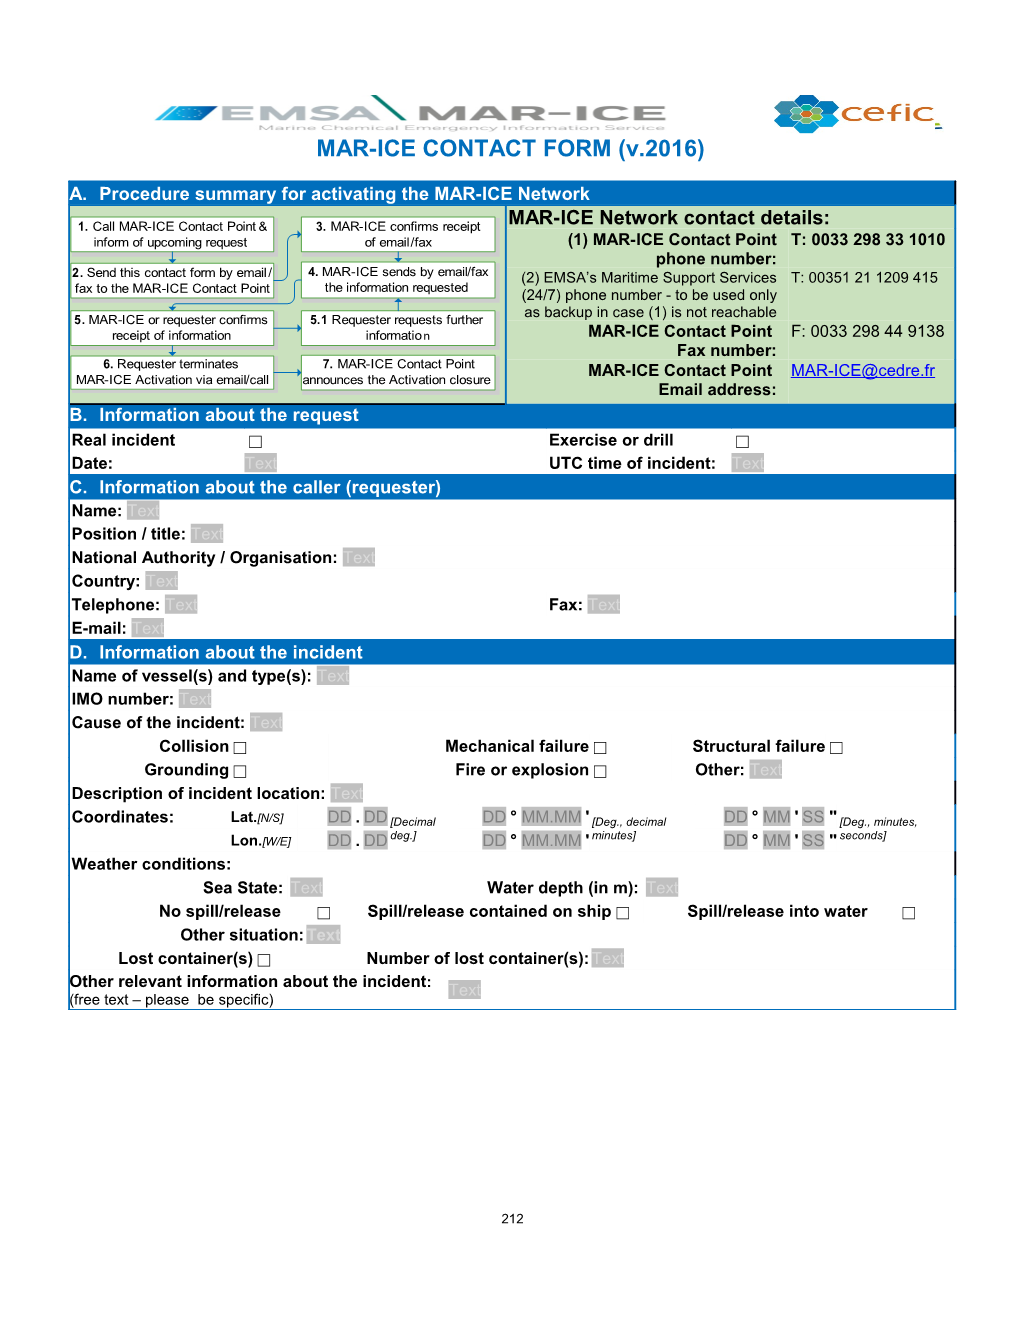 EMSA Briefing Note Template